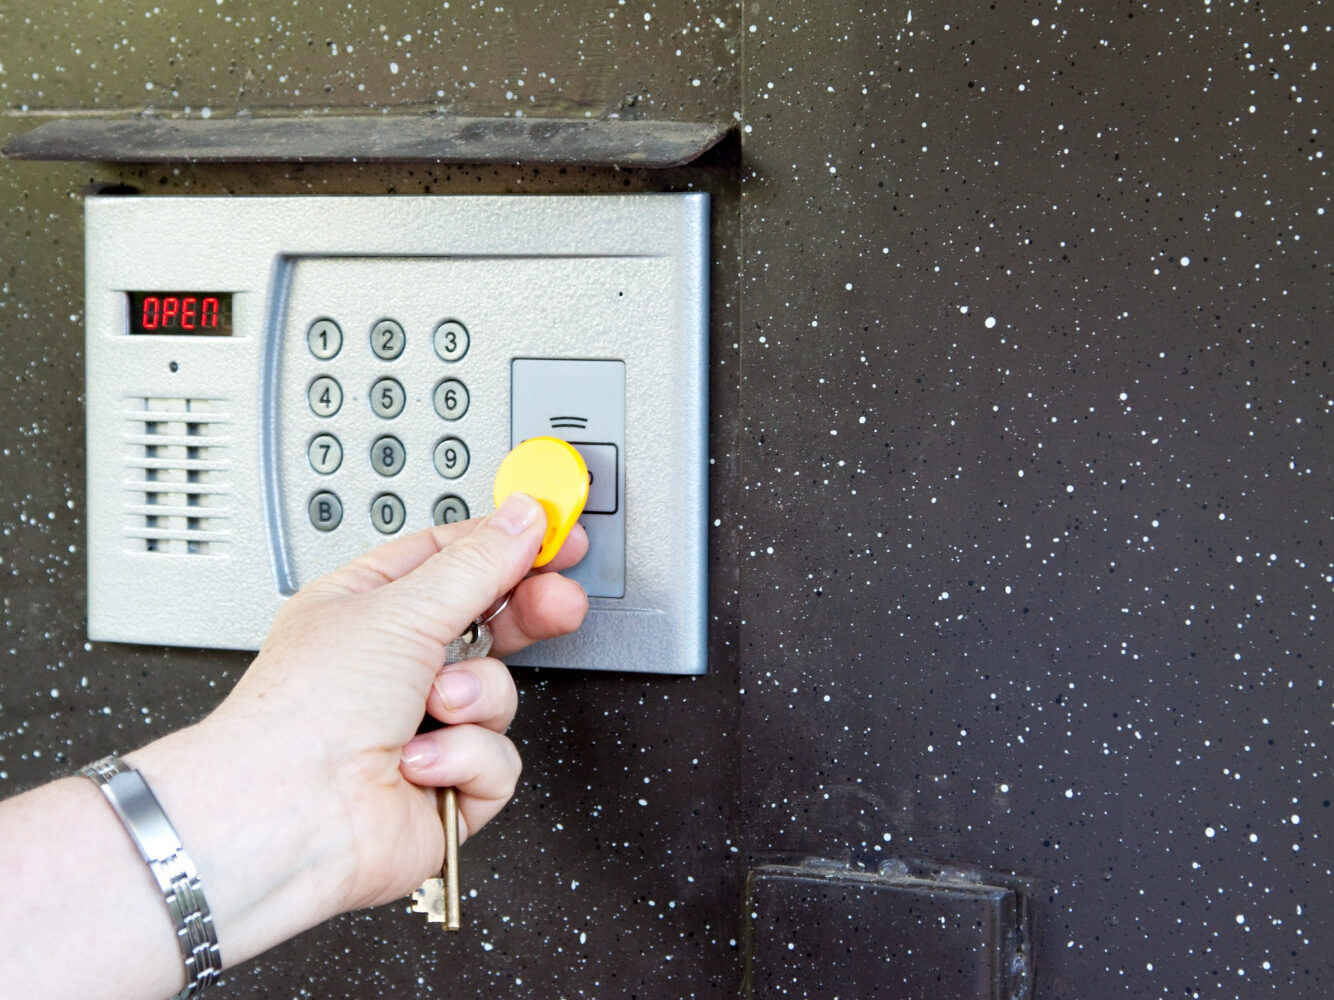 Physical Security is of the utmost importance, such as intercoms with built-in keyfob detectors.

Image by bearfotos